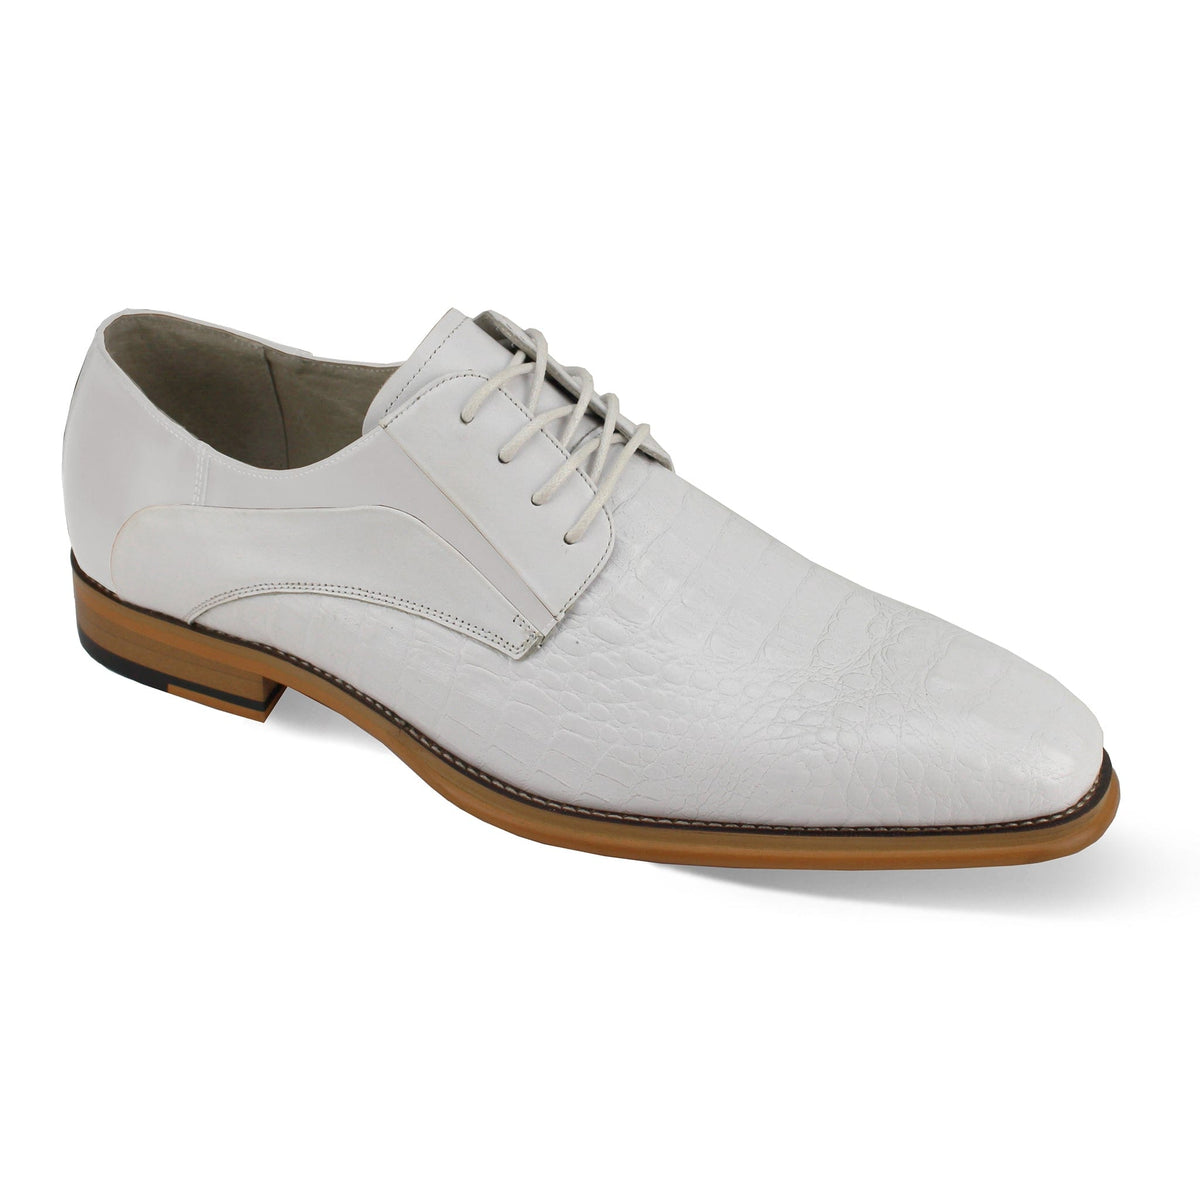 GIOVANNI LEATHER SHOES FT WHITE / 7 GIOVANNI LEATHER SHOES-MASON-WHITE